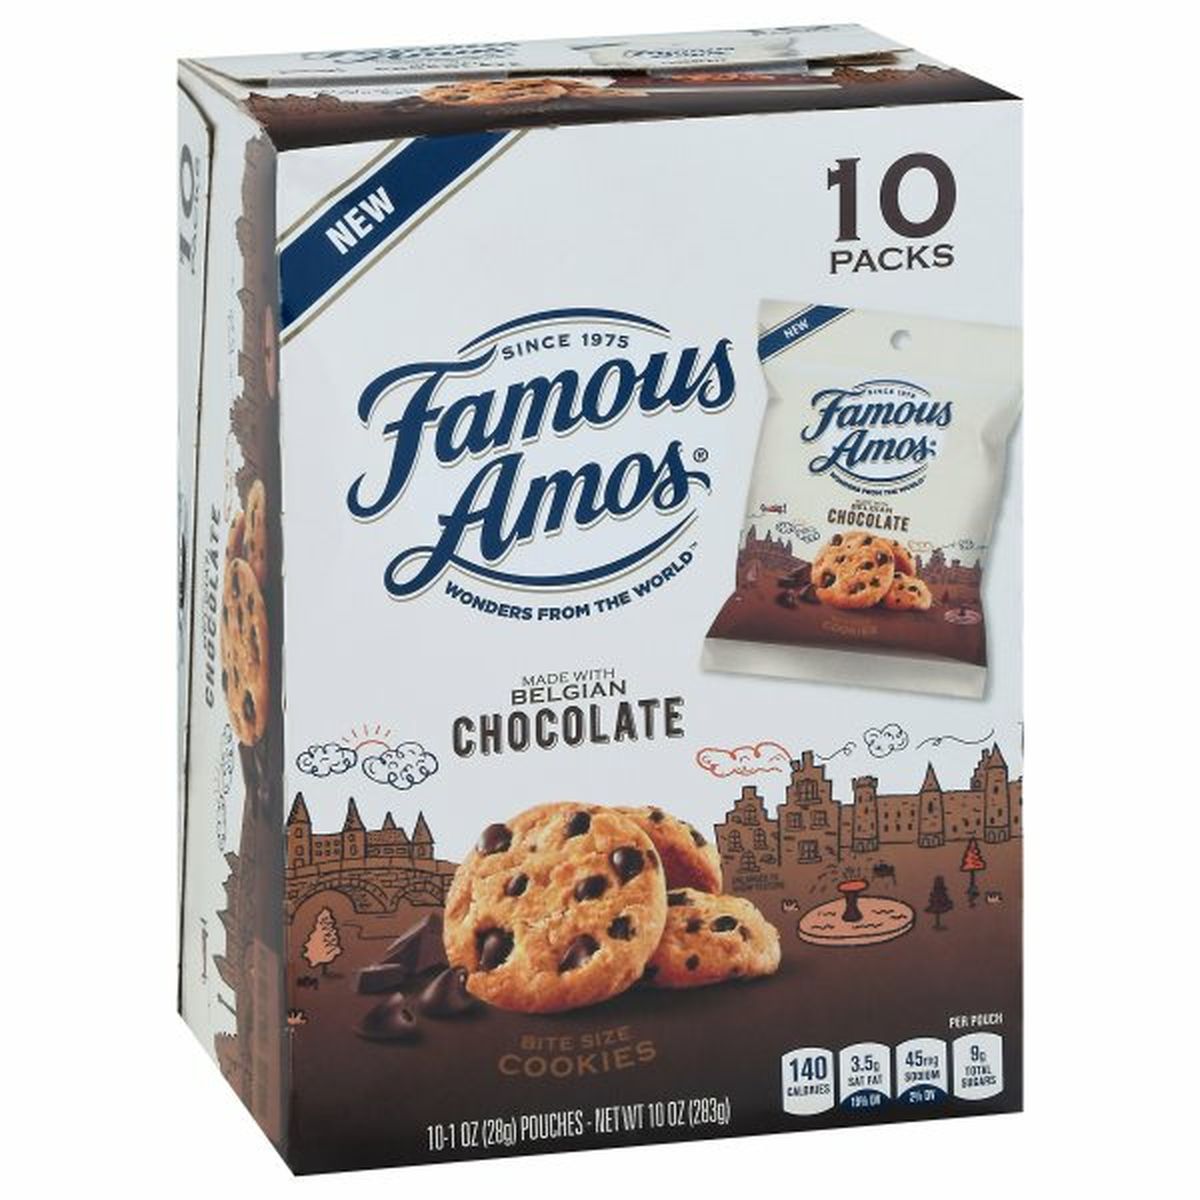 Calories in Famous Amos Cookies, Chocolate, Bite Size, 10 Pack